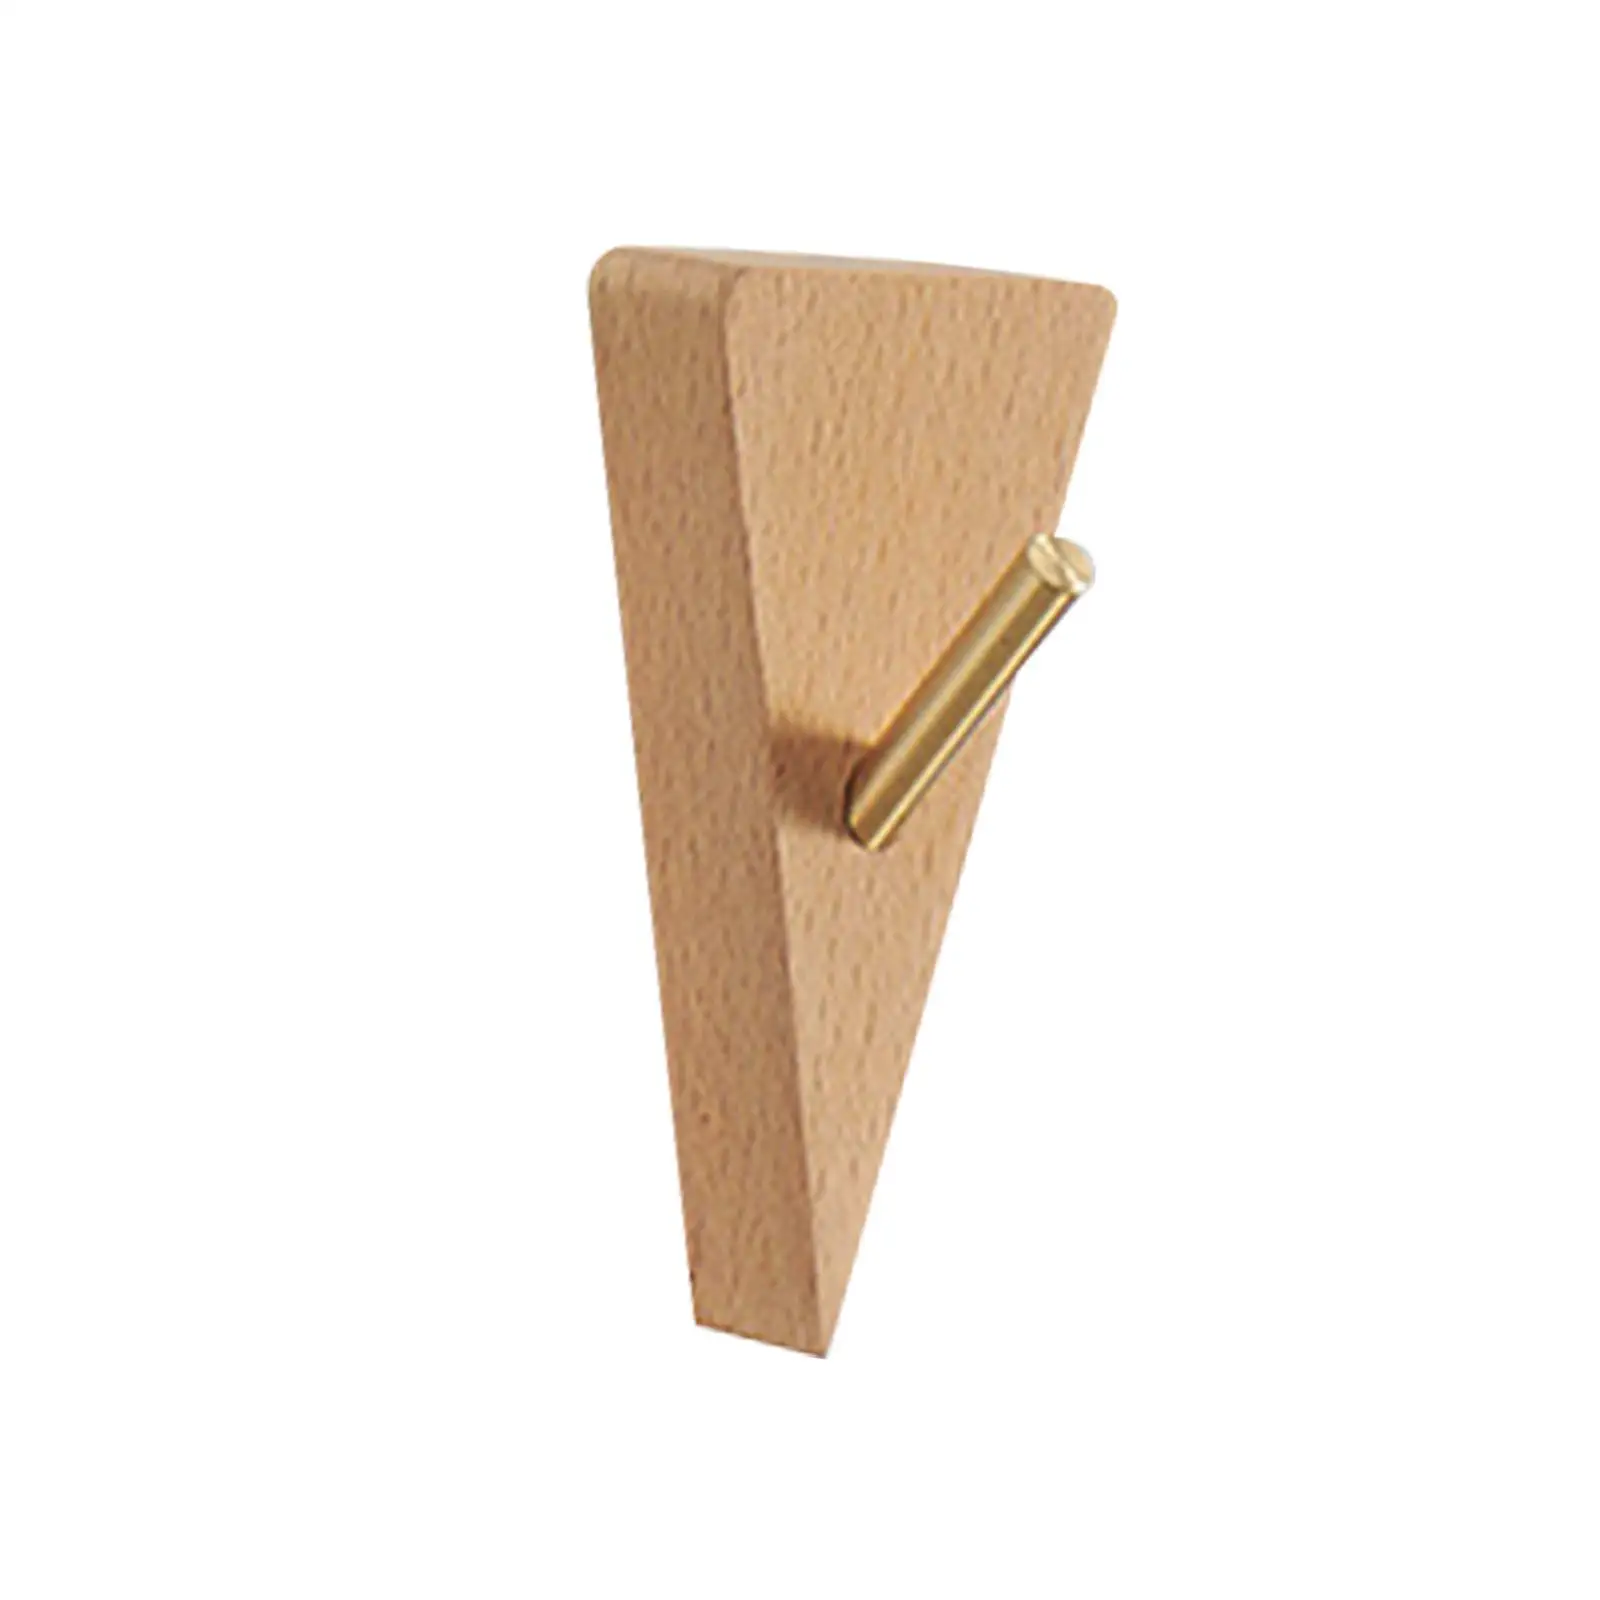 Triangle Hooks Wood Punch Free Multipurpose Wall Rack Holder Coat Clothes Towel Hook for Door Entryway Purse Living Room Home